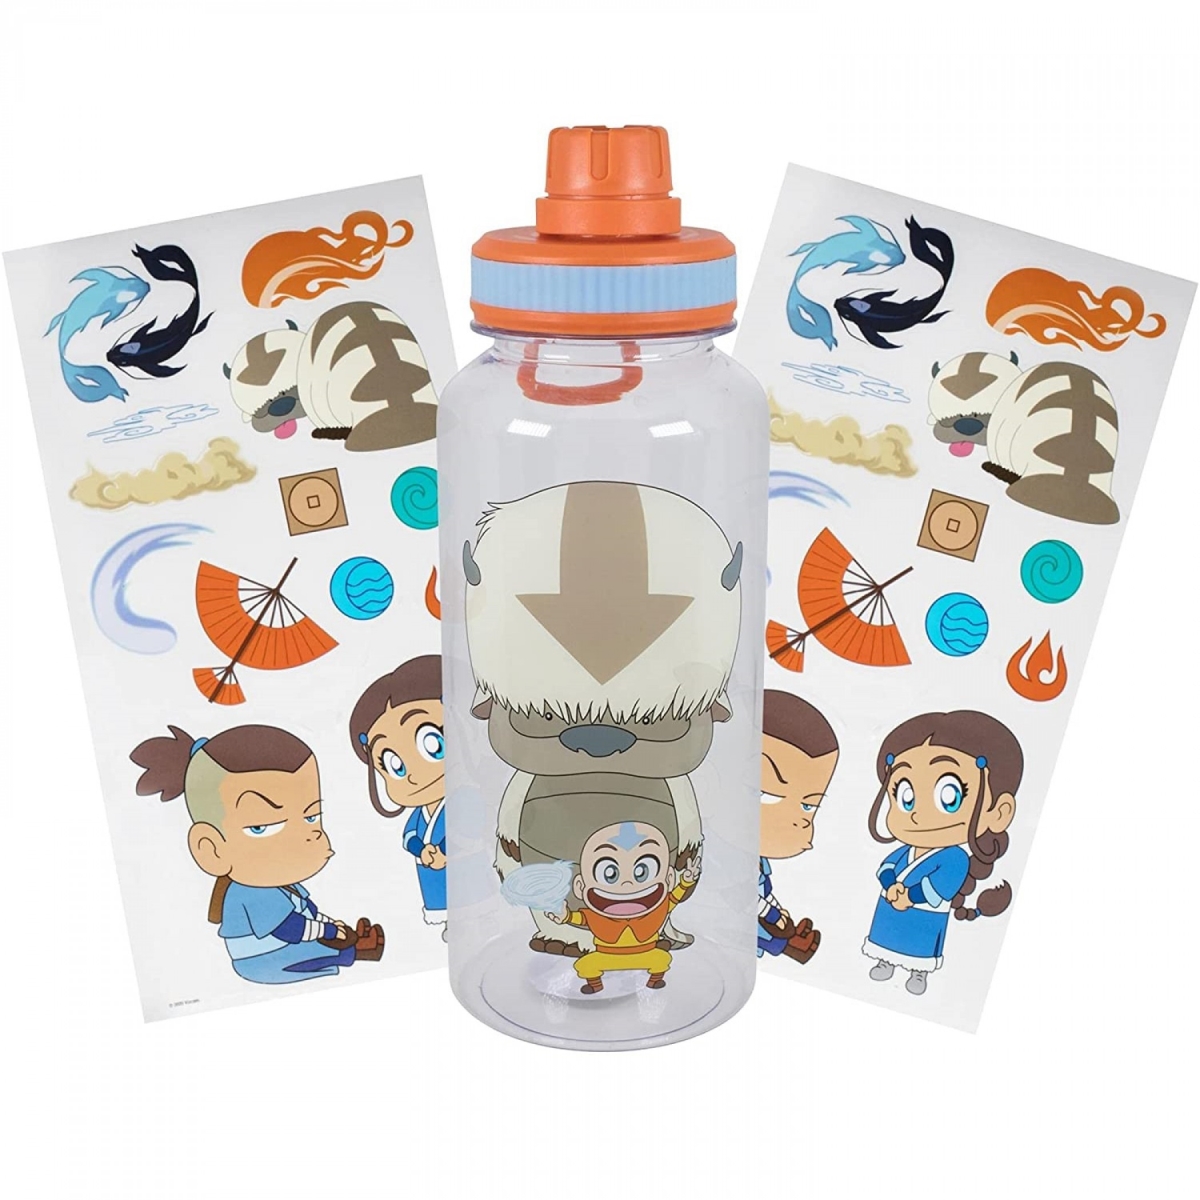 Picture of Anime & Manga 825656 32 oz Avatar - The Last Airbender Chibi Icons Water Bottle with Stickers